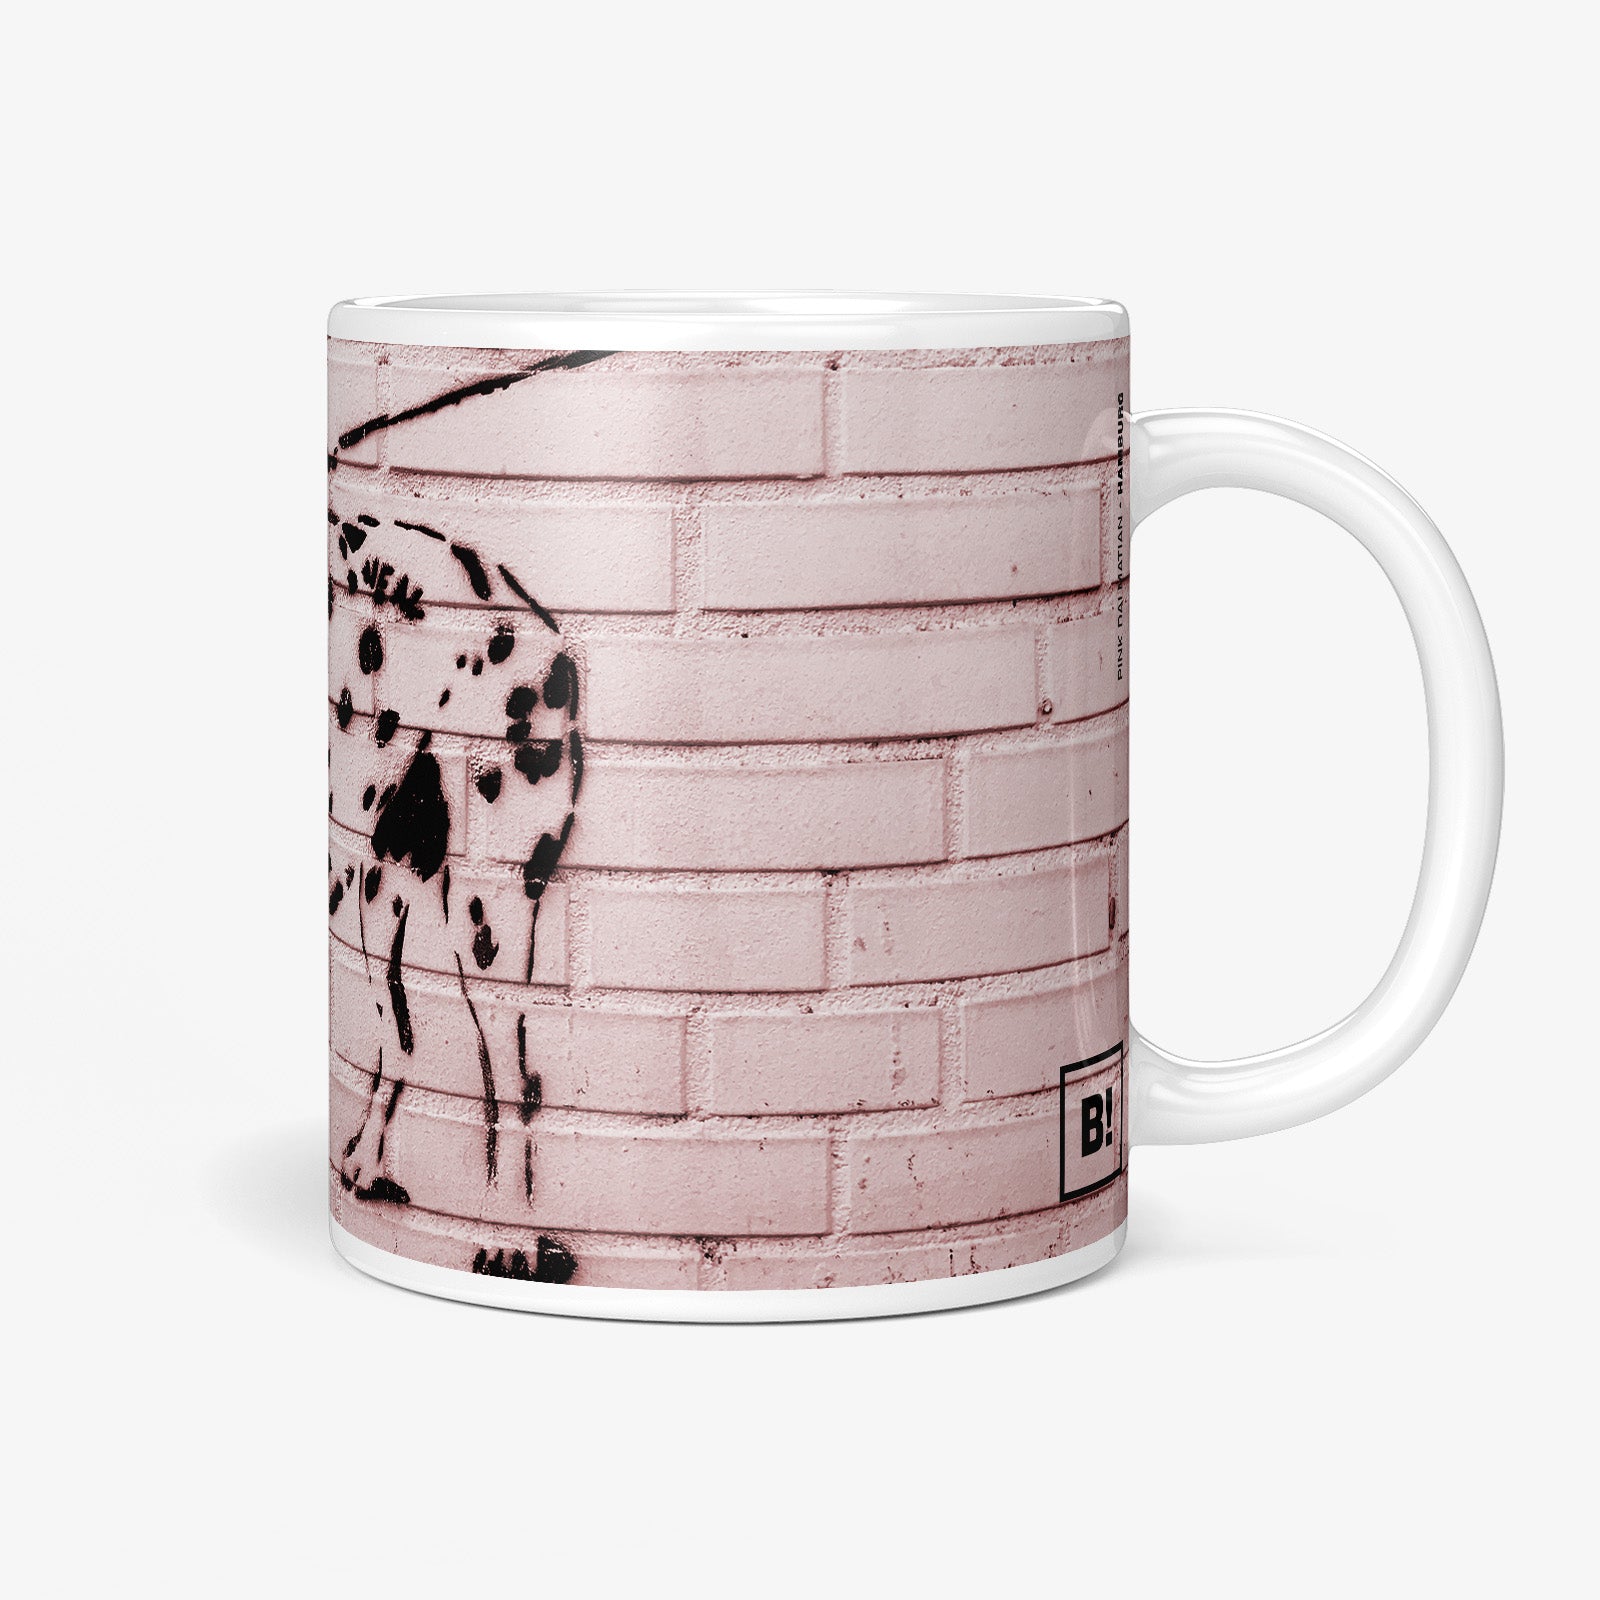 Be inspired by our Urban Art Coffee Mug "Pink Dalmatian" from Hamburg. This mug features an 11oz size with the handle on the right.